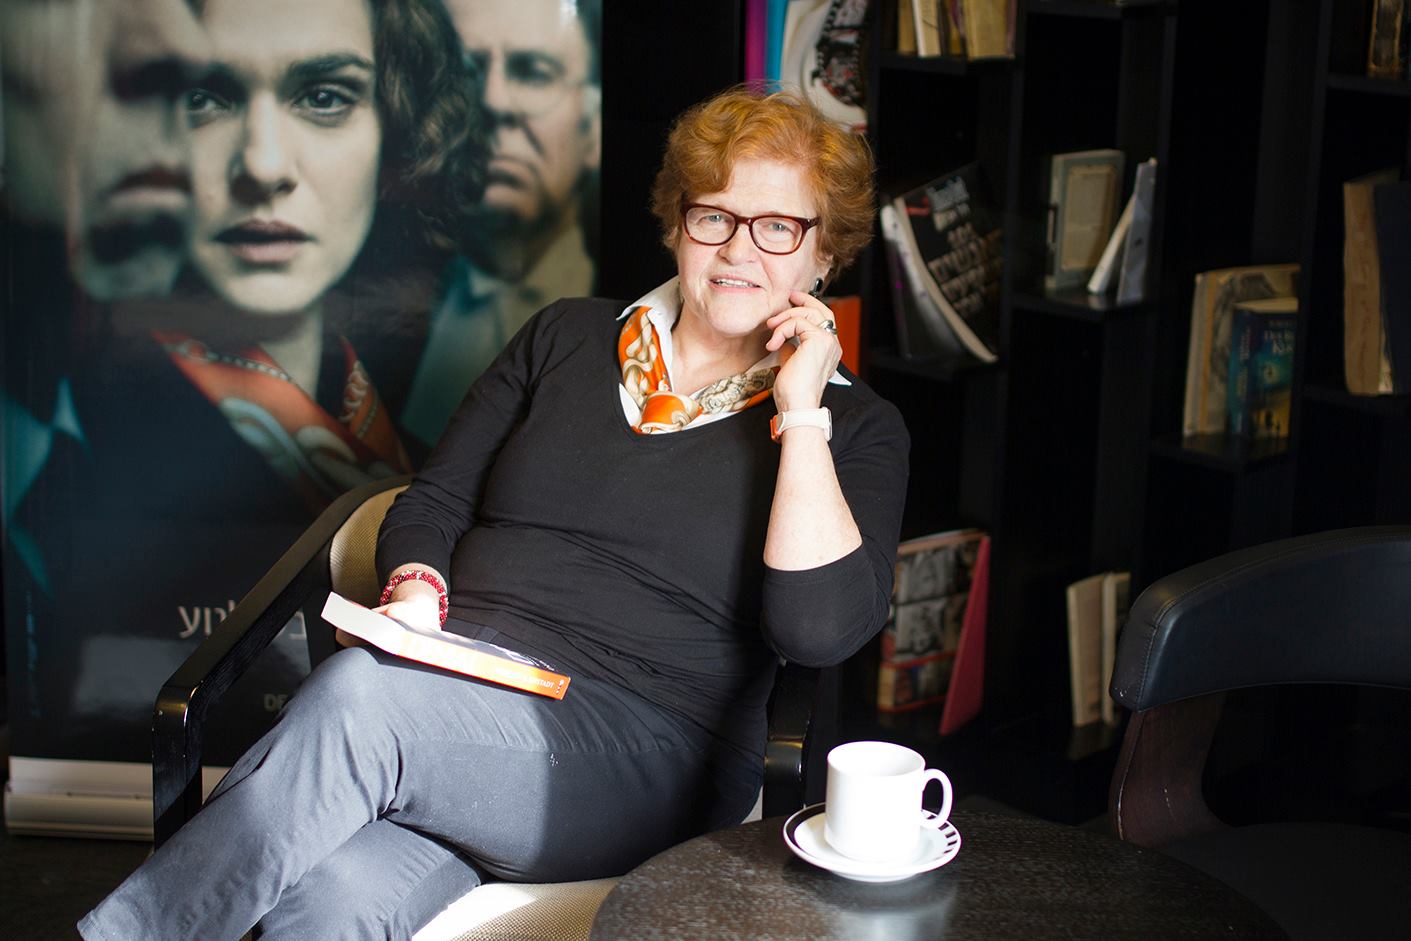 Deborah Lipstadt photographed in front of the poster for the 2017 film "Denial," based on her book "History on Trial: My Day in Court with a Holocaust Denier." Via Facebook